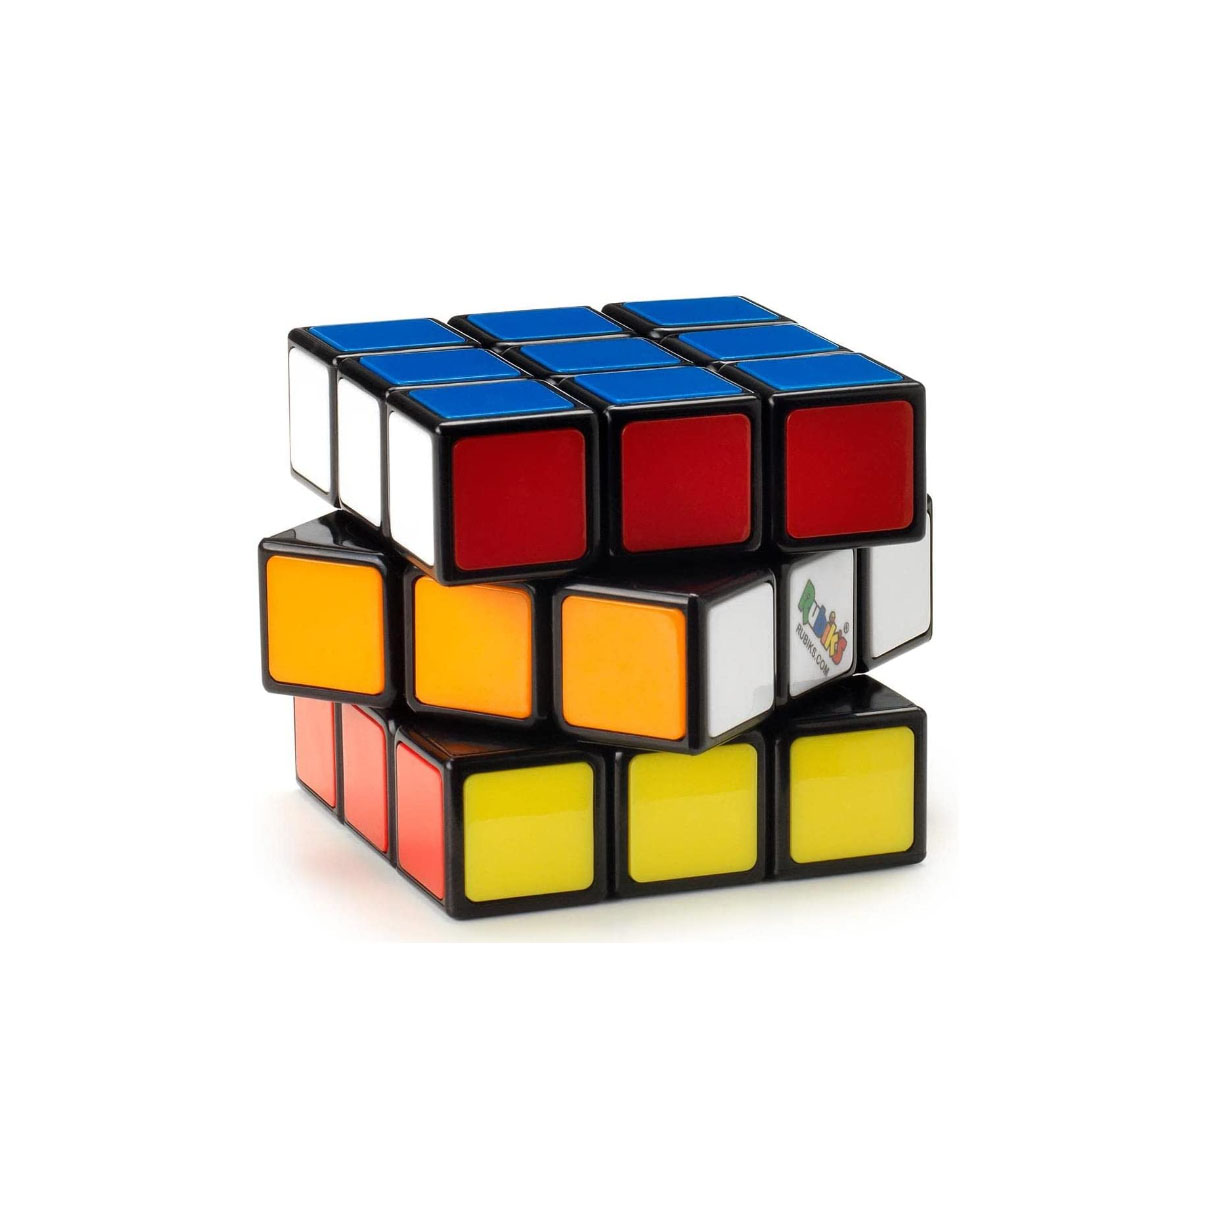 rubiks cube 3x3 ( spin master - 6063968 - 6063970 )